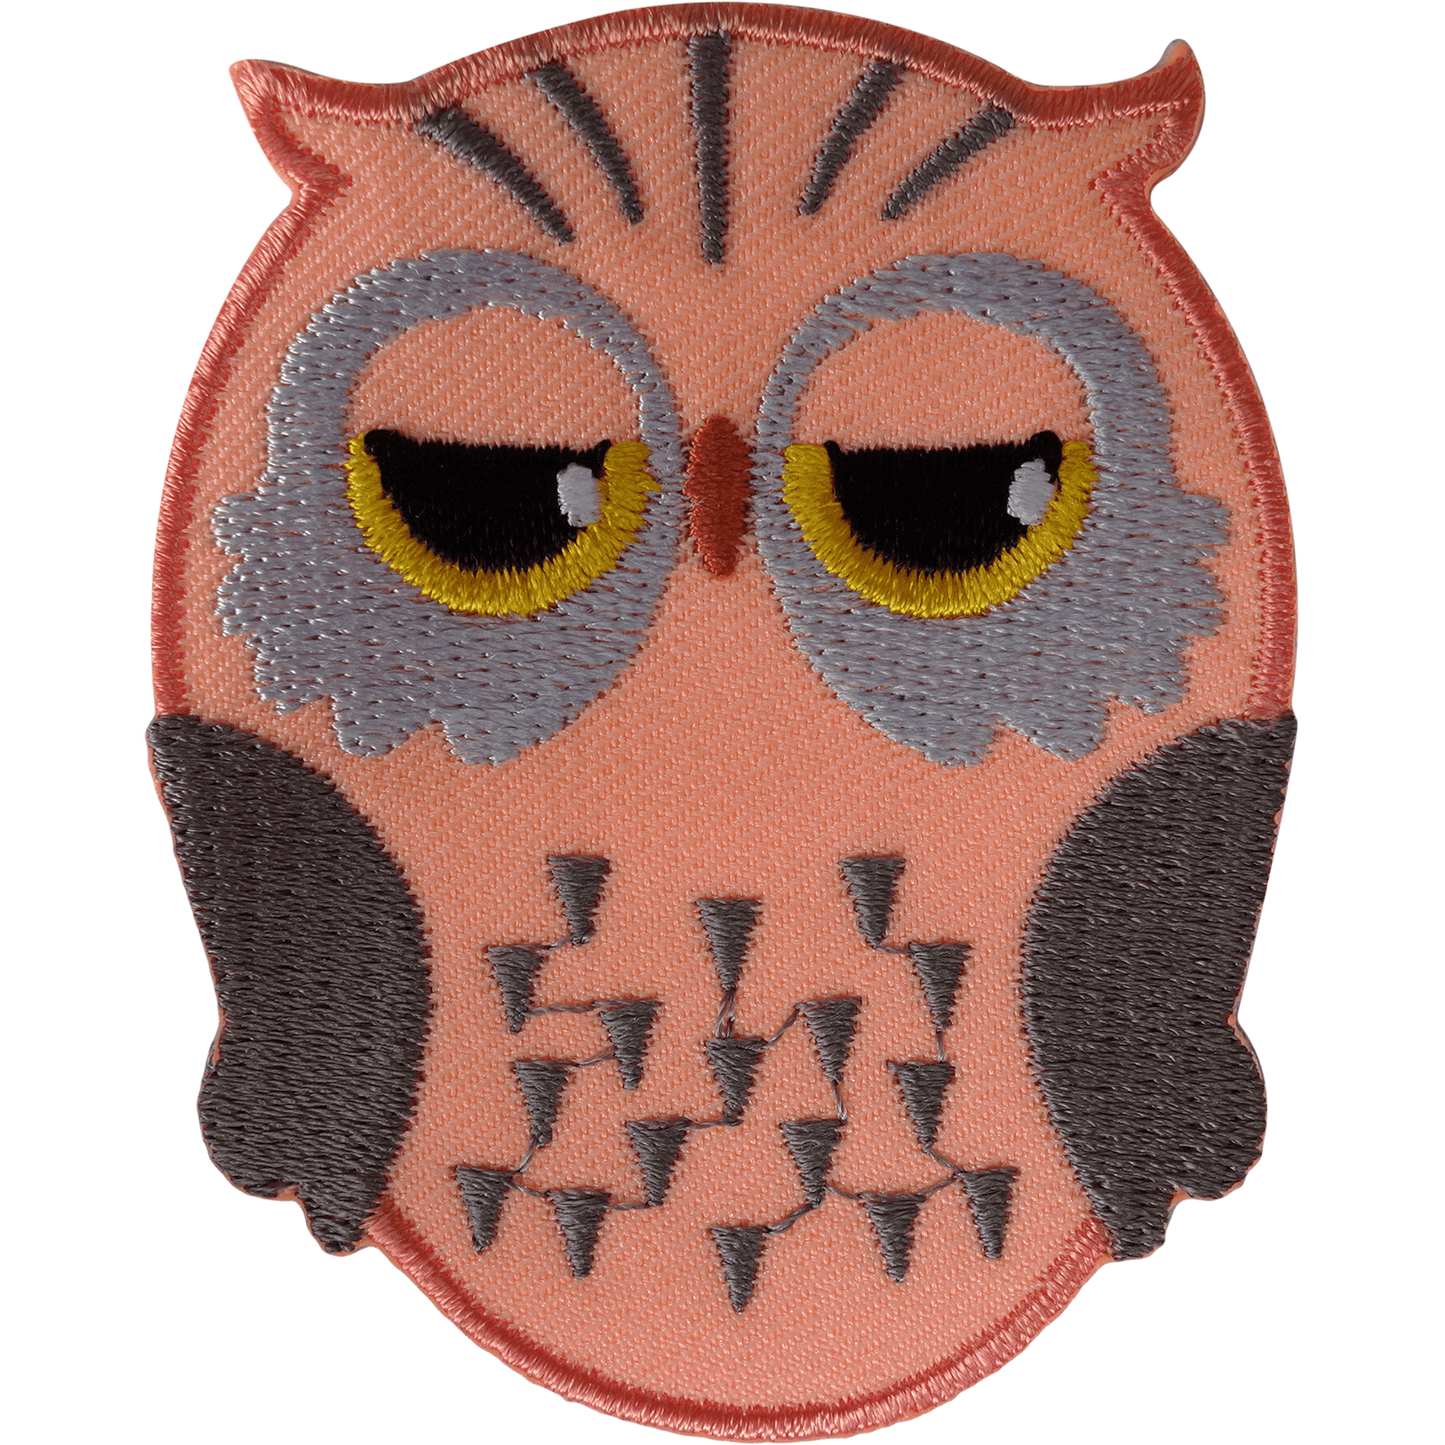 Owl Iron On Patch Sew On Bird Animal Embroidered Badge Craft Embroidery Applique